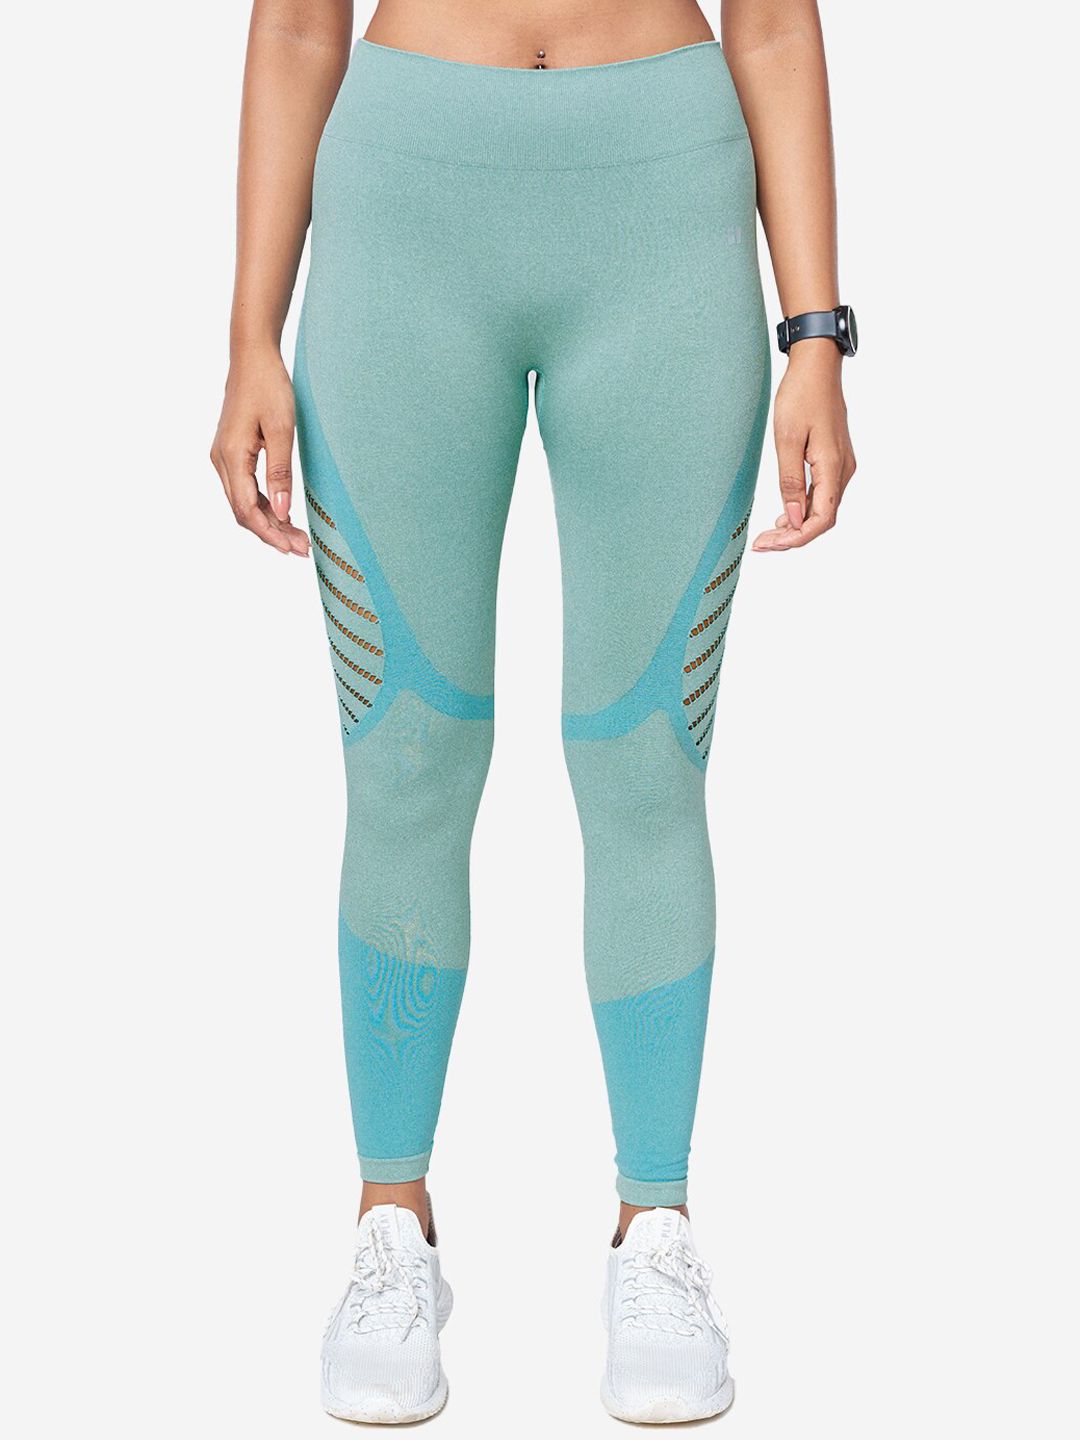 The Souled Store Women Turquoise Blue Tss Active Sports Tights Price in India